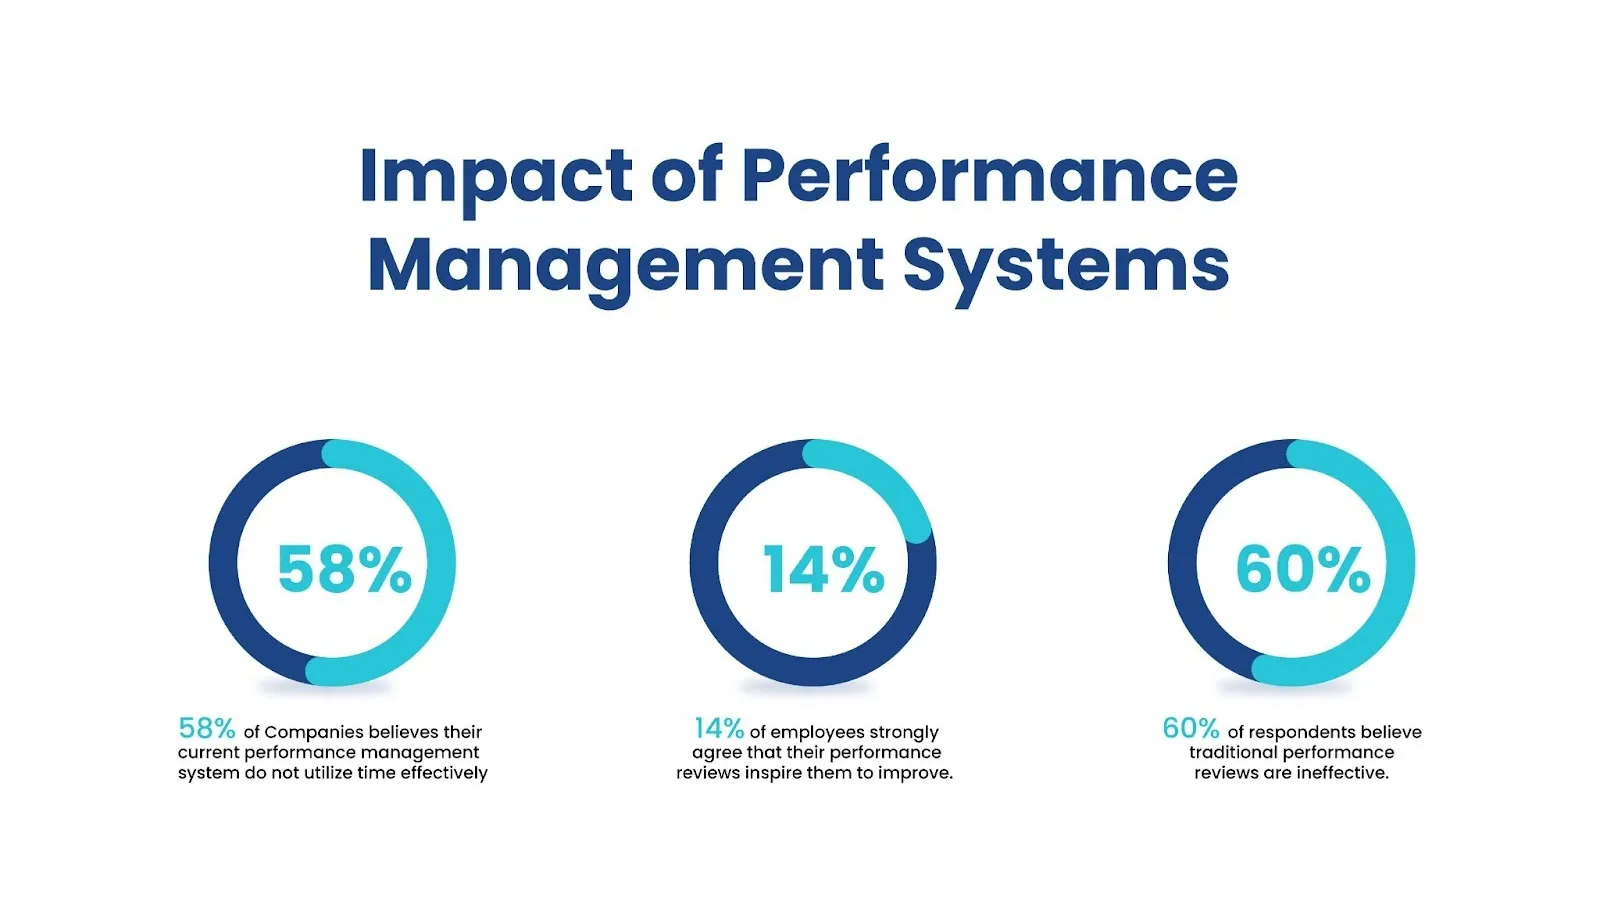 pie chart showing Impact of Performance Management Systems